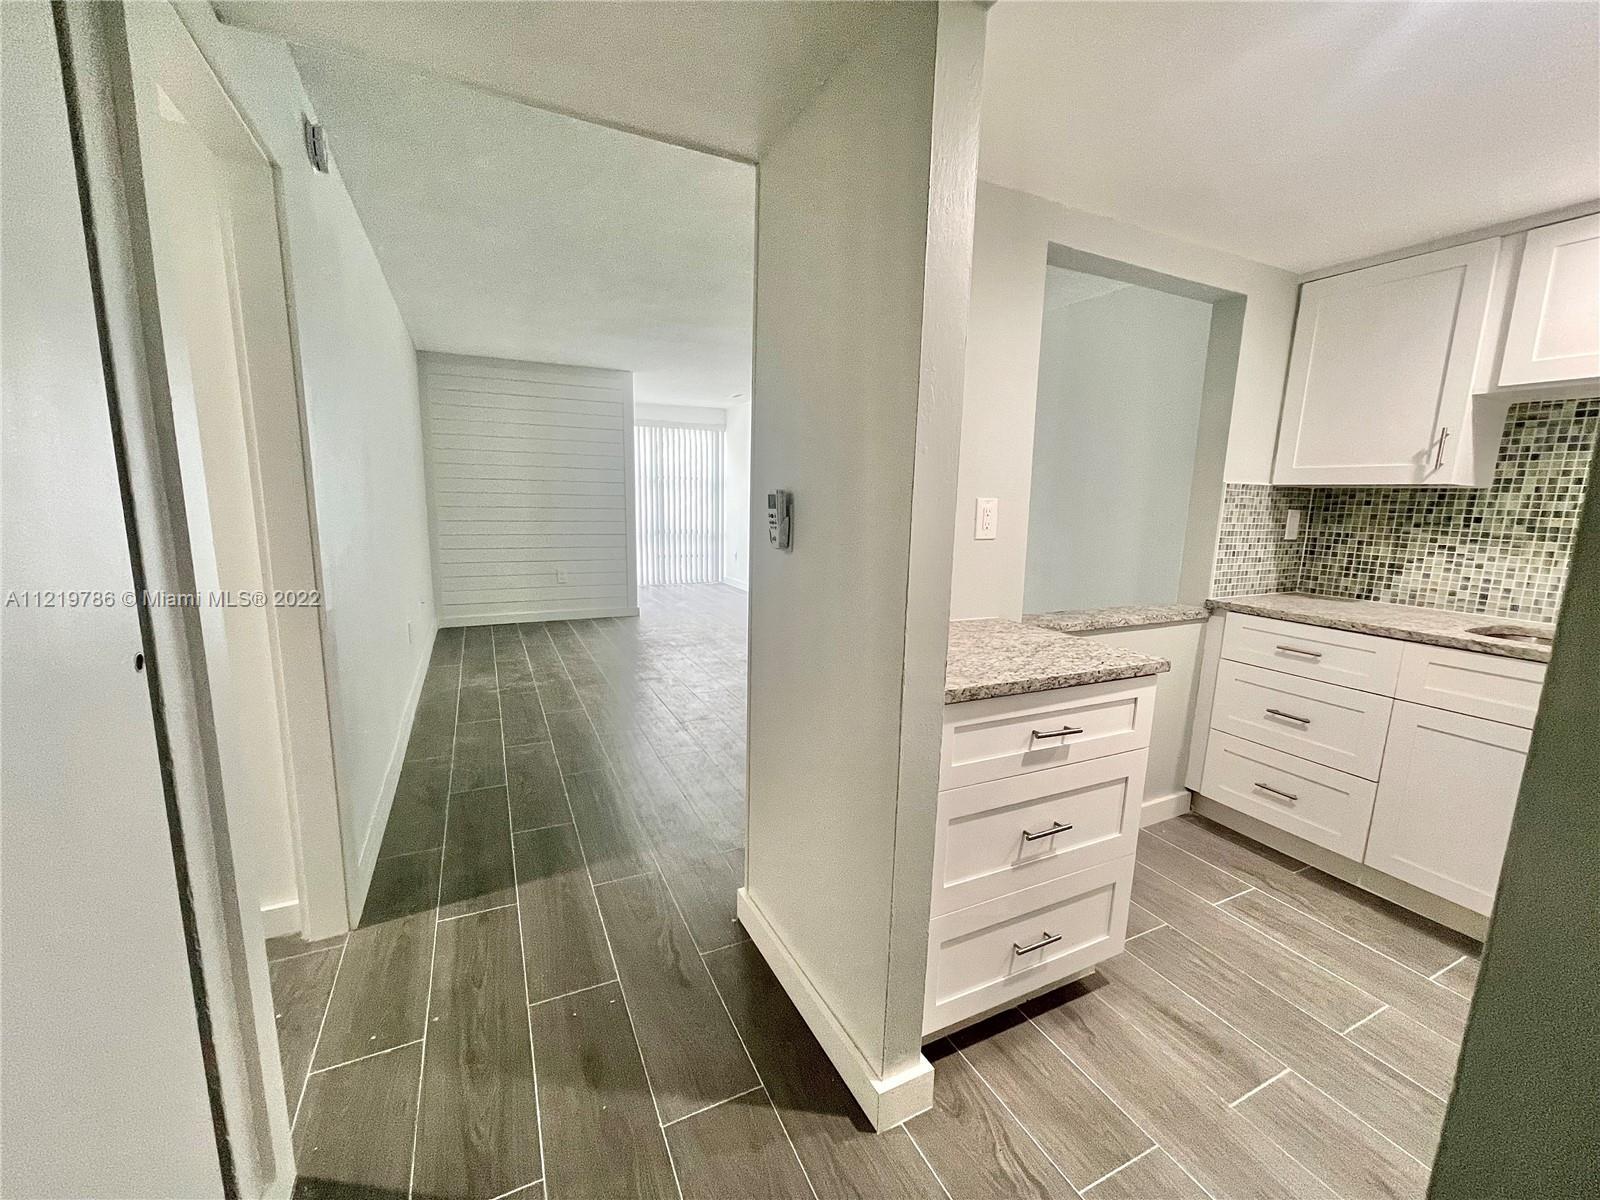 Completely remodeled 1 Bedroom with the possibility of adding a Den. One block away from the Beach, 